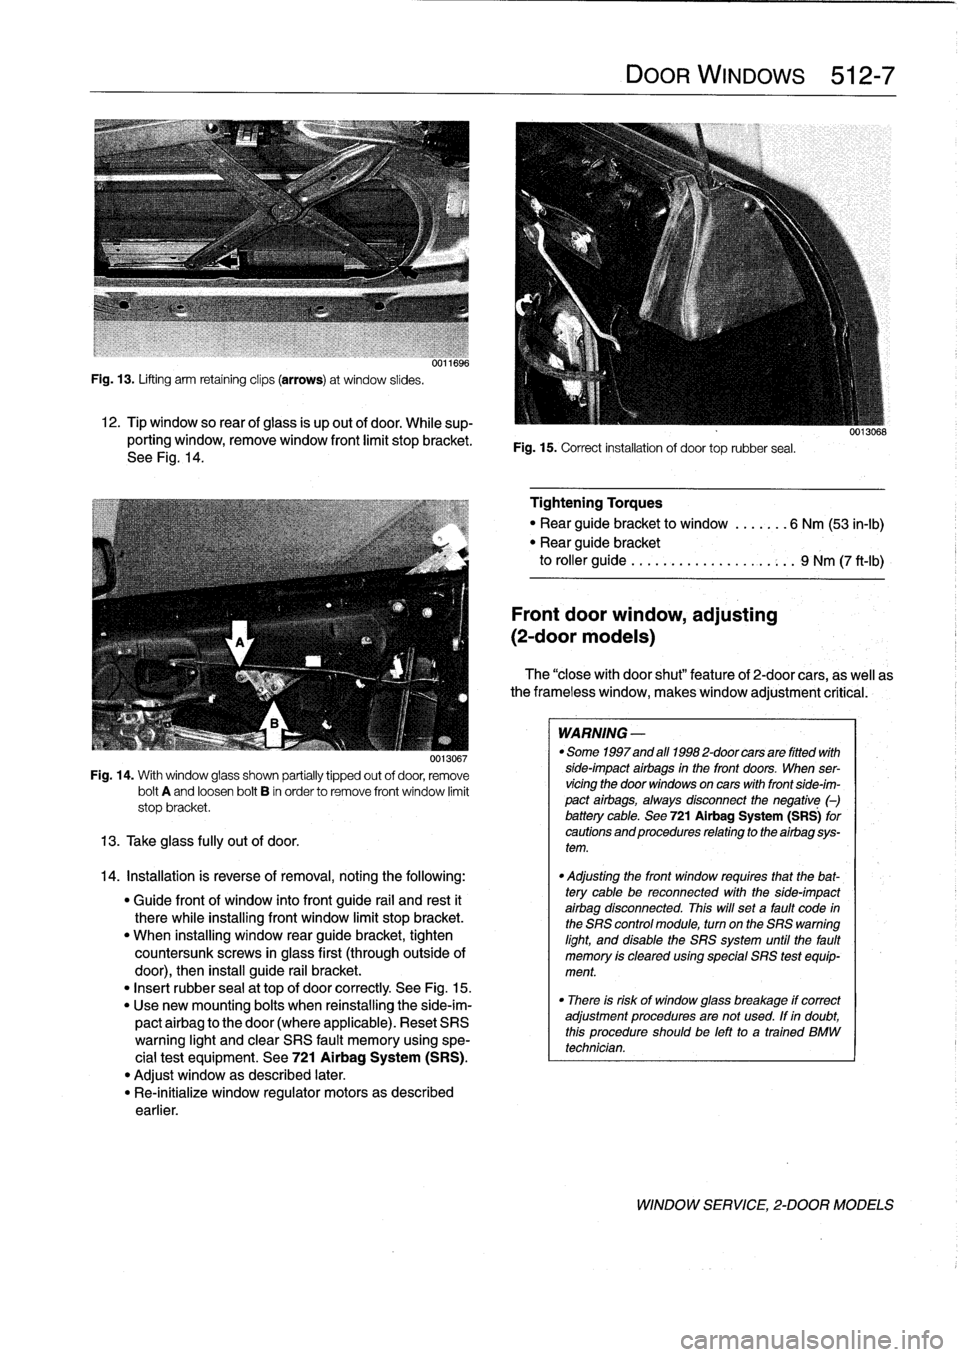 BMW 318i 1996 E36 Workshop Manual 
Fig
.
13
.
Lifting
arm
retaining
clips
(arrows)
at
window
slides
.

12
.
Tip
window
so
rear
ofglass
is
up
out
of
door
.
While
sup-
porting
window,
remove
window
front
limit
stopbracket
.
See
Fig
.
14